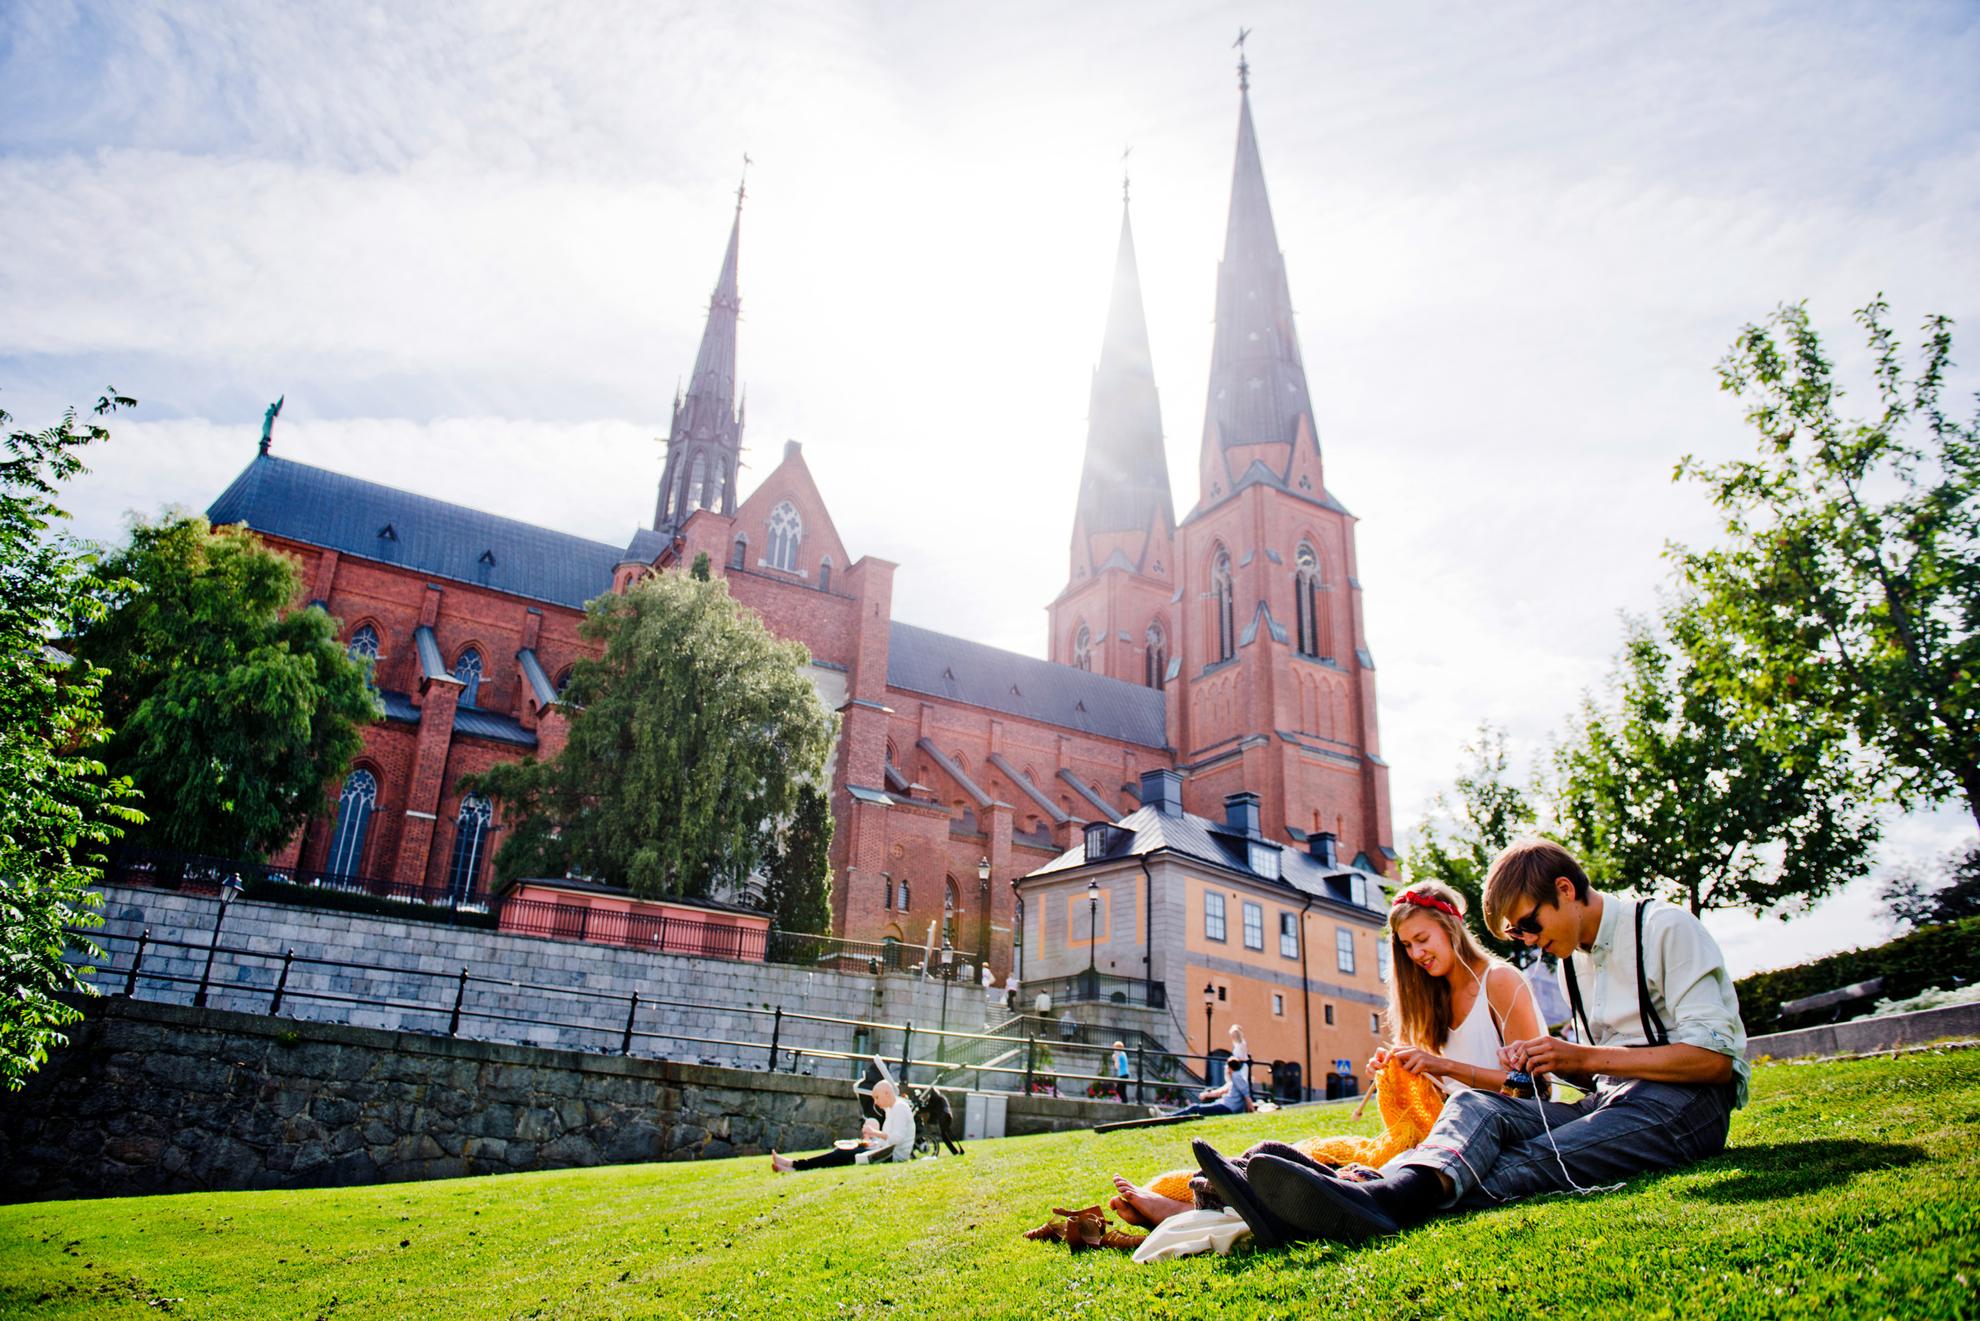 Sunny view over Uppsala Cathedral with people in the foreground sitting on the green grass.